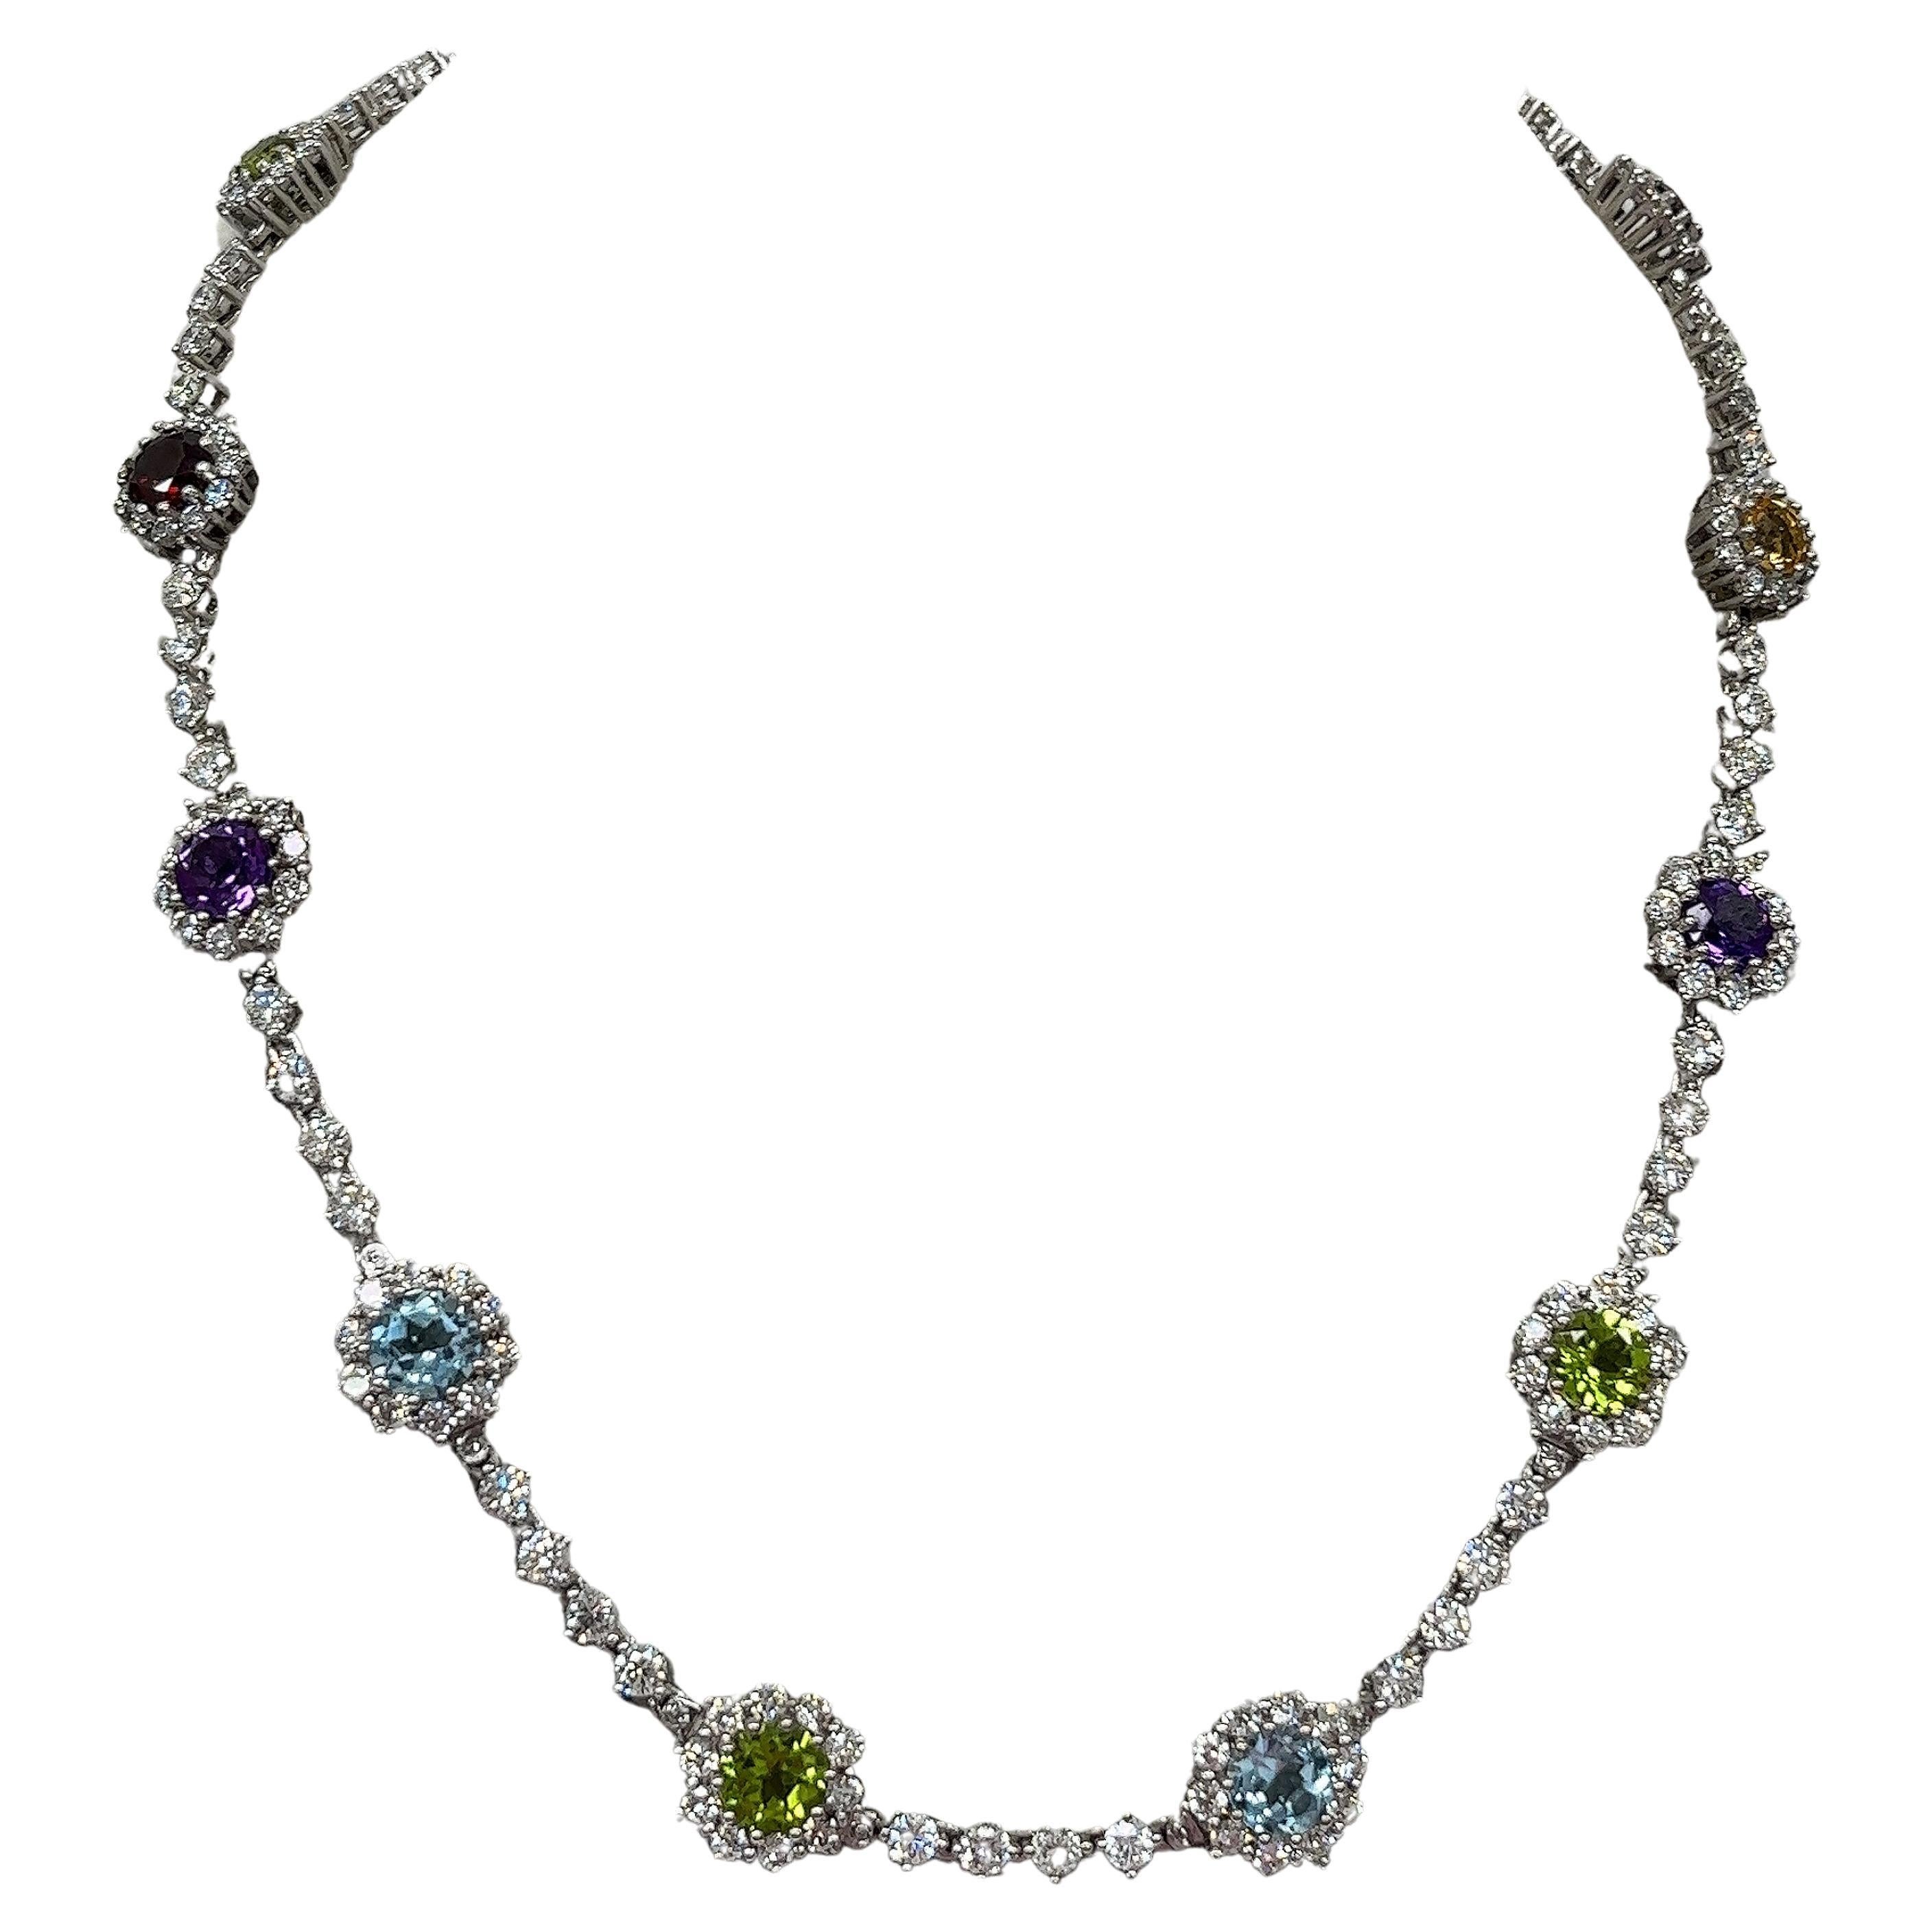 18ct White Gold Diamond and Multi Gemstone necklace, set with 10.0ct of Diamonds